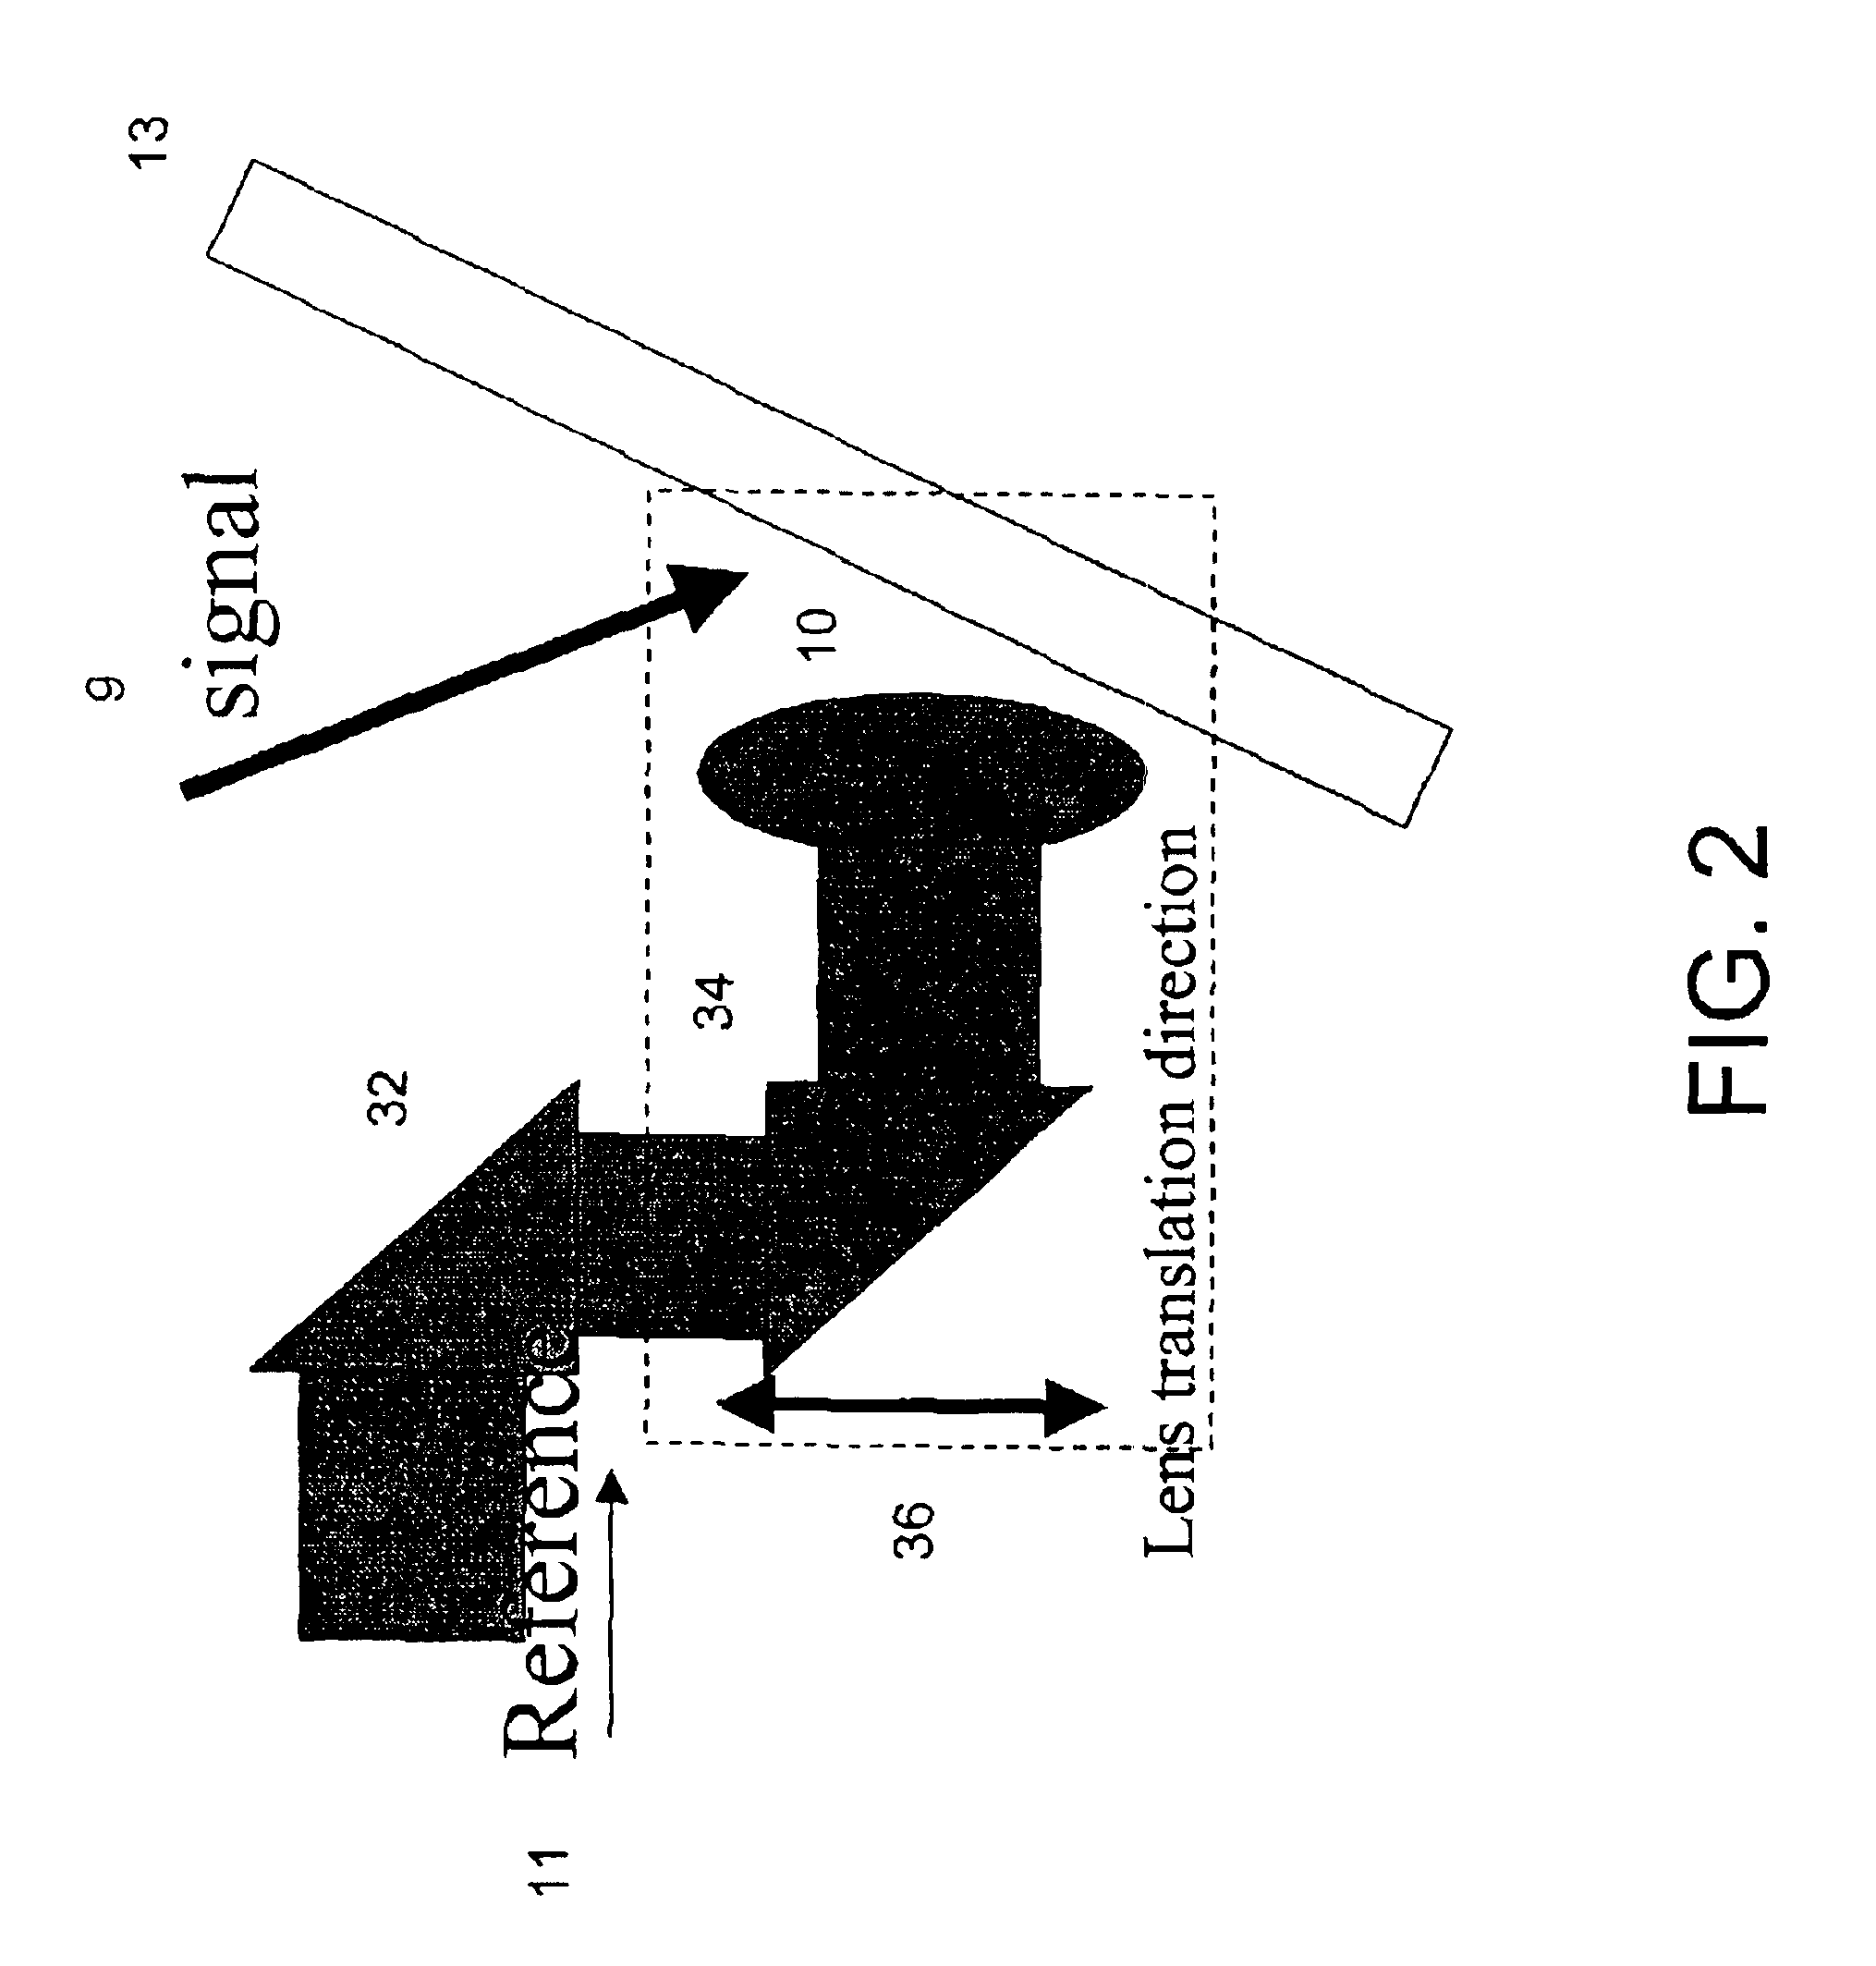 Process for holographic multiplexing